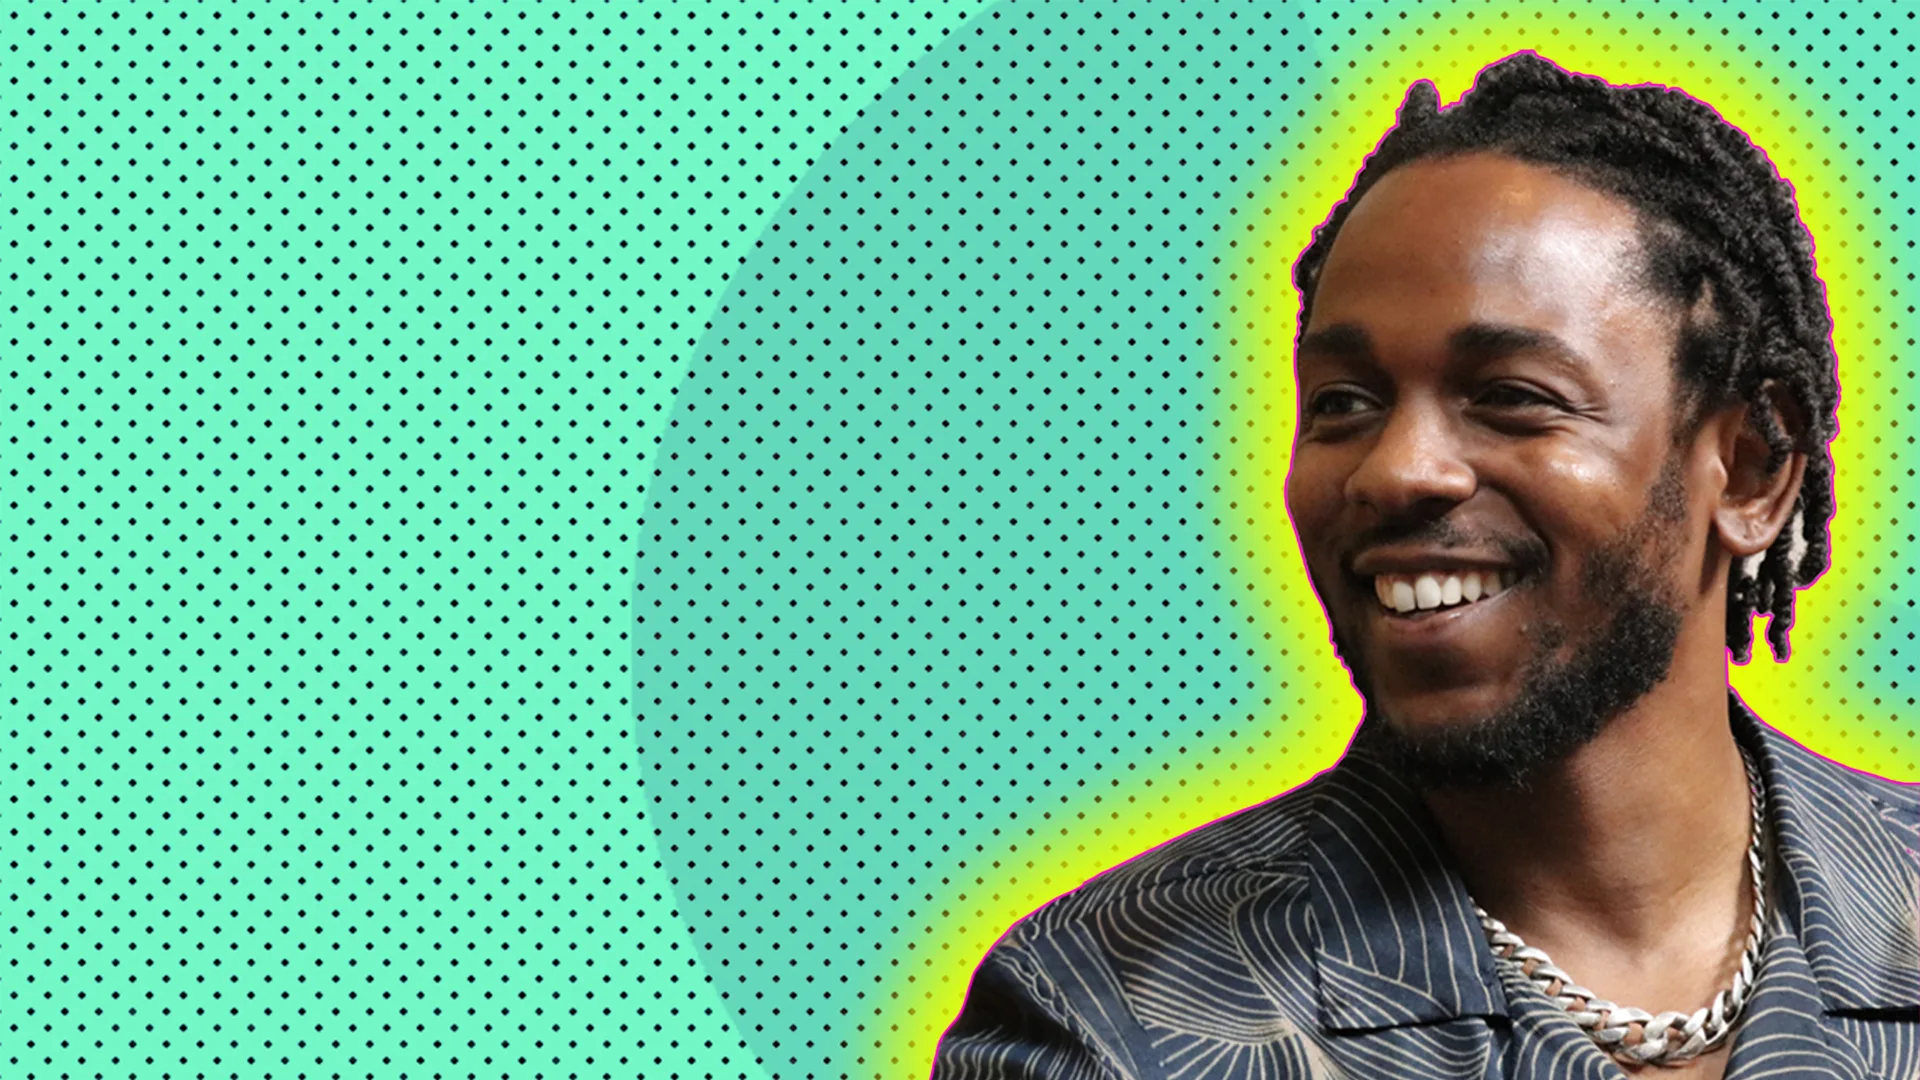 Kendrick Lamar with a yellow glow behind them on a turquoise background